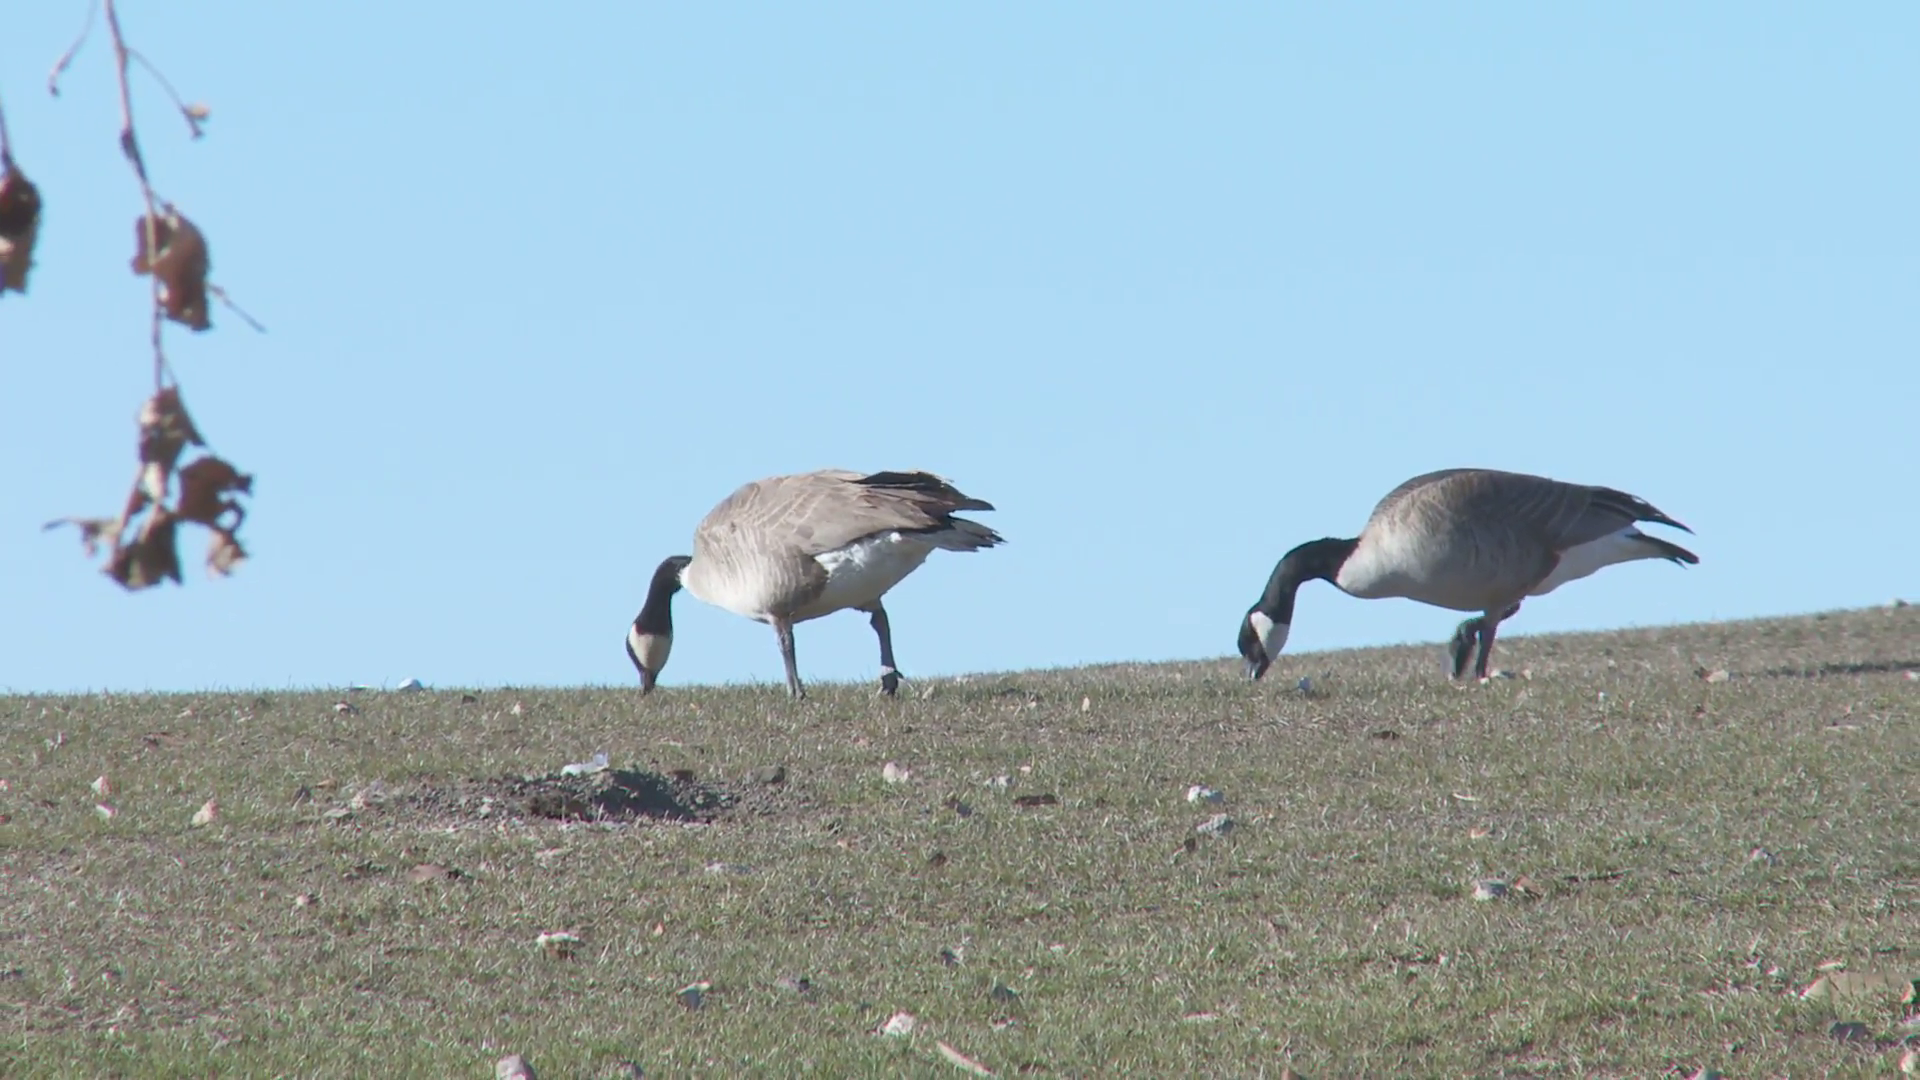 Two Canadian Geese Eating Stock Video Footage - VideoBlocks